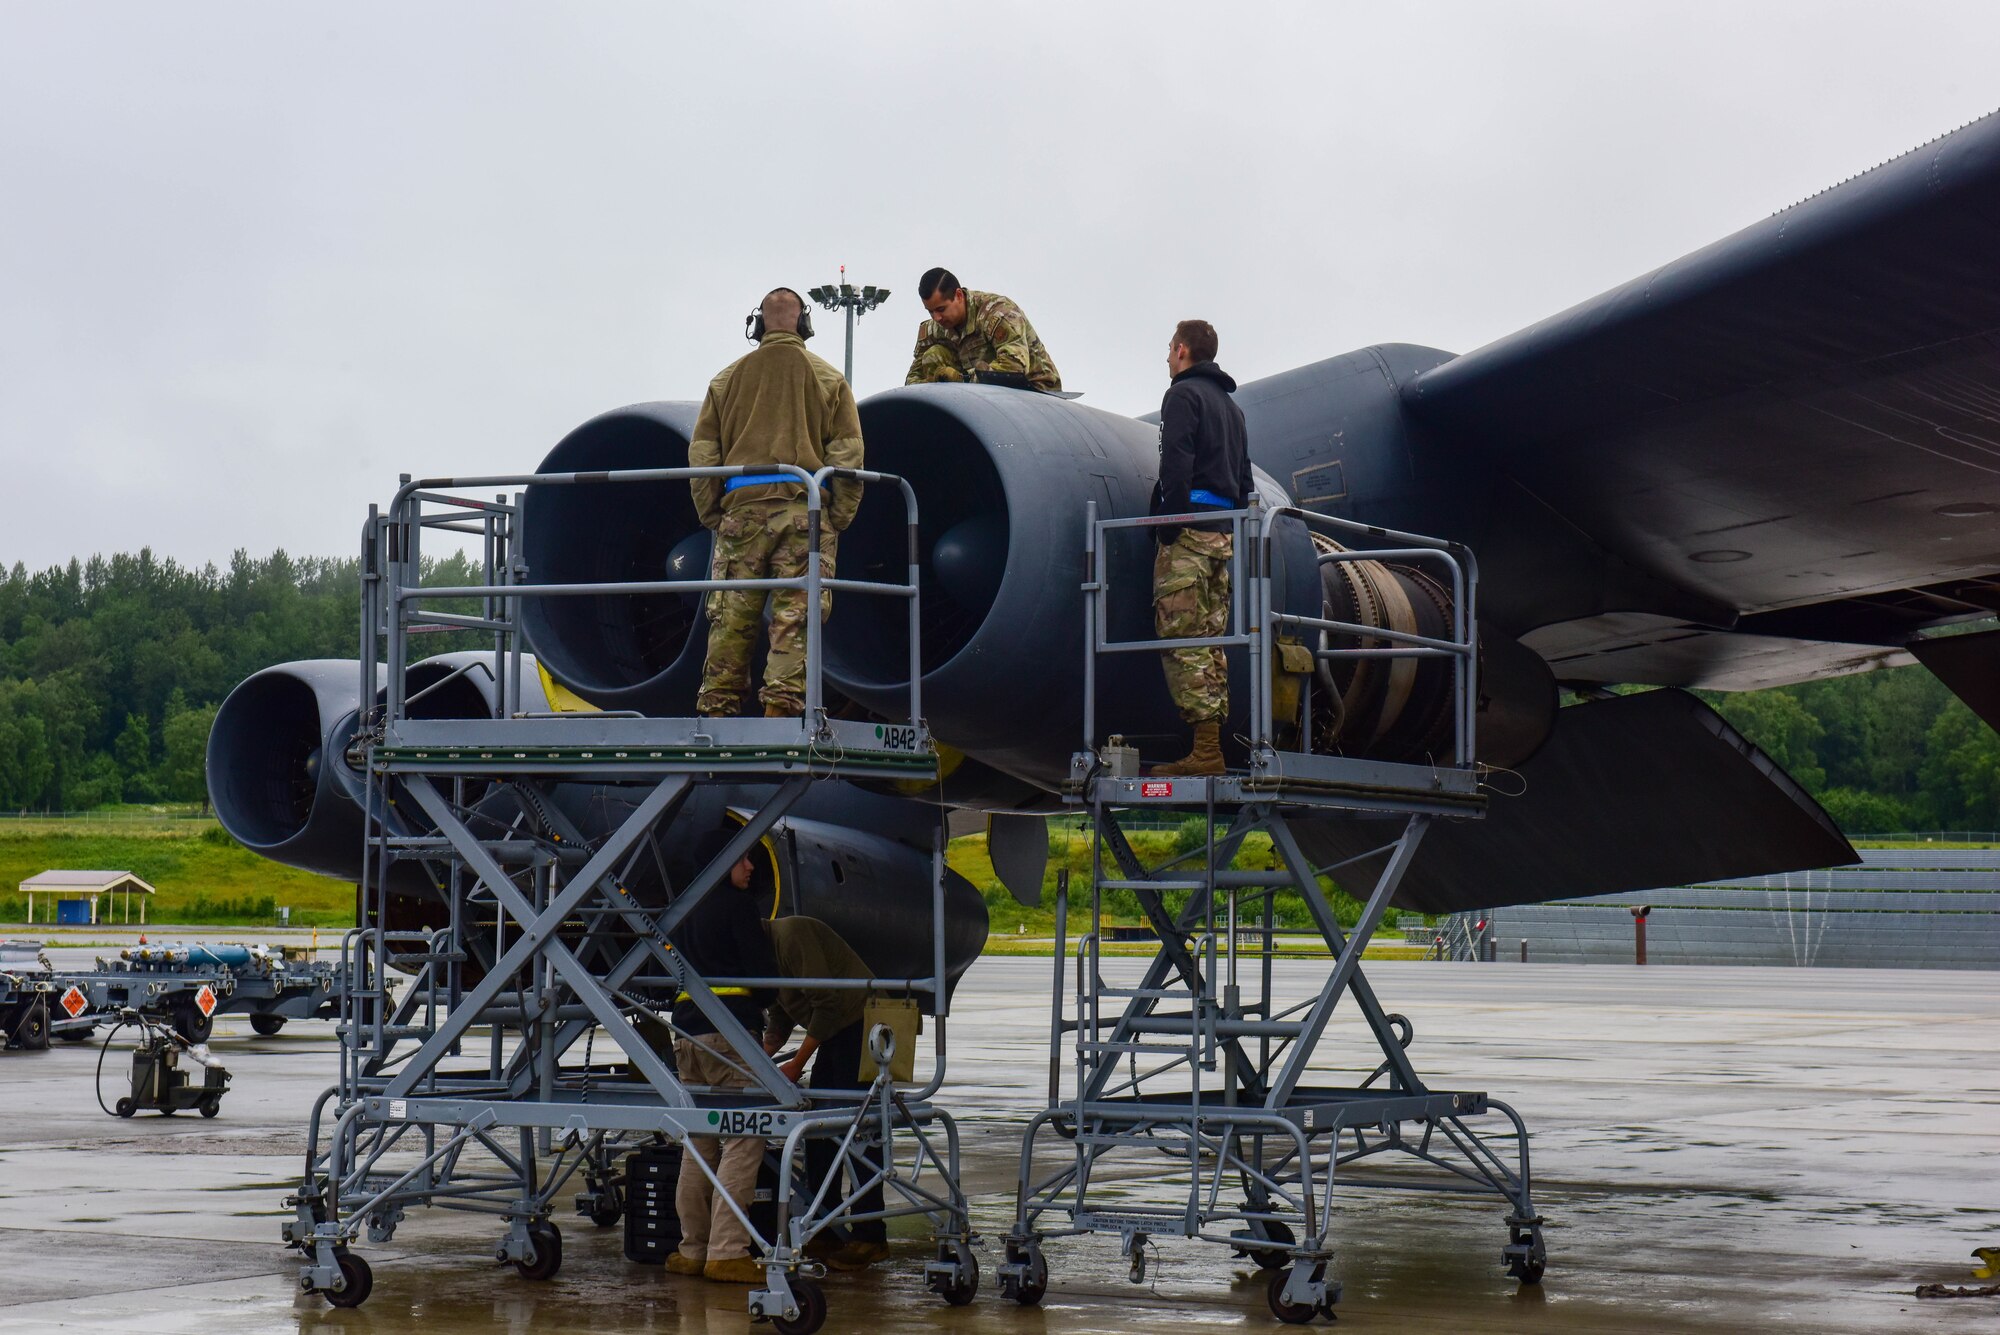 Maintenance Airmen from the 69th Bomb Squadron at Minot Air Force Base, North Dakota, perform maintenance on a B-52H Stratofortress engine at Joint Base Elmendorf-Richardson, Alaska, July 17, 2023. The Airmen from the 69th are responsible for the aircraft’s repair, upkeep and readiness to deploy U.S. Strategic Command assets at a moment’s notice. (U.S. Air Force photo by Senior Airman Zachary Wright)